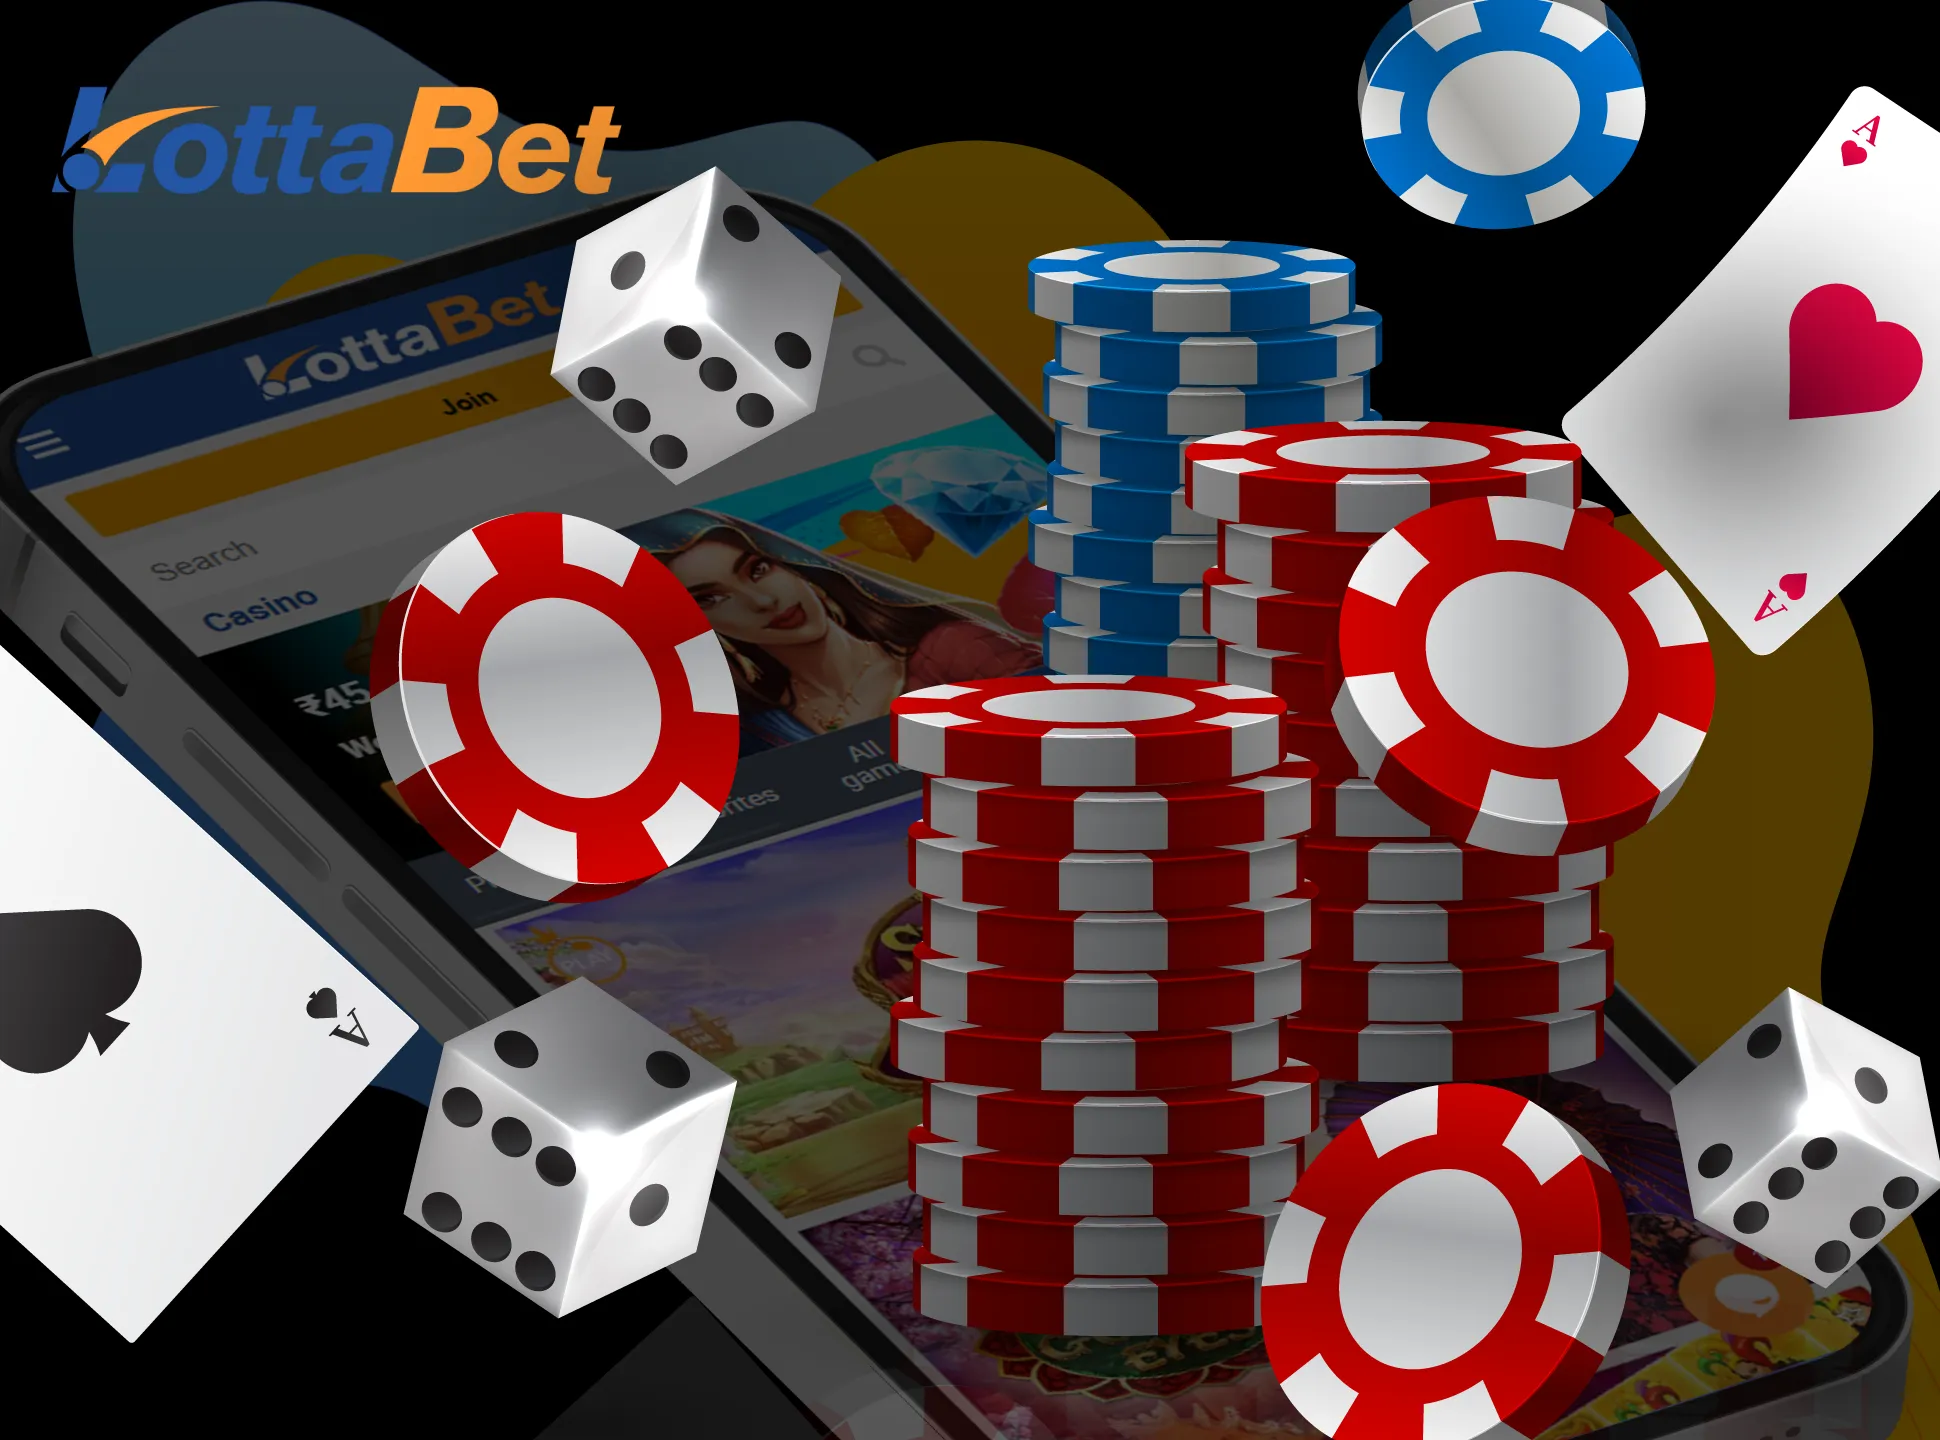 Lottabet also has an online casino section.